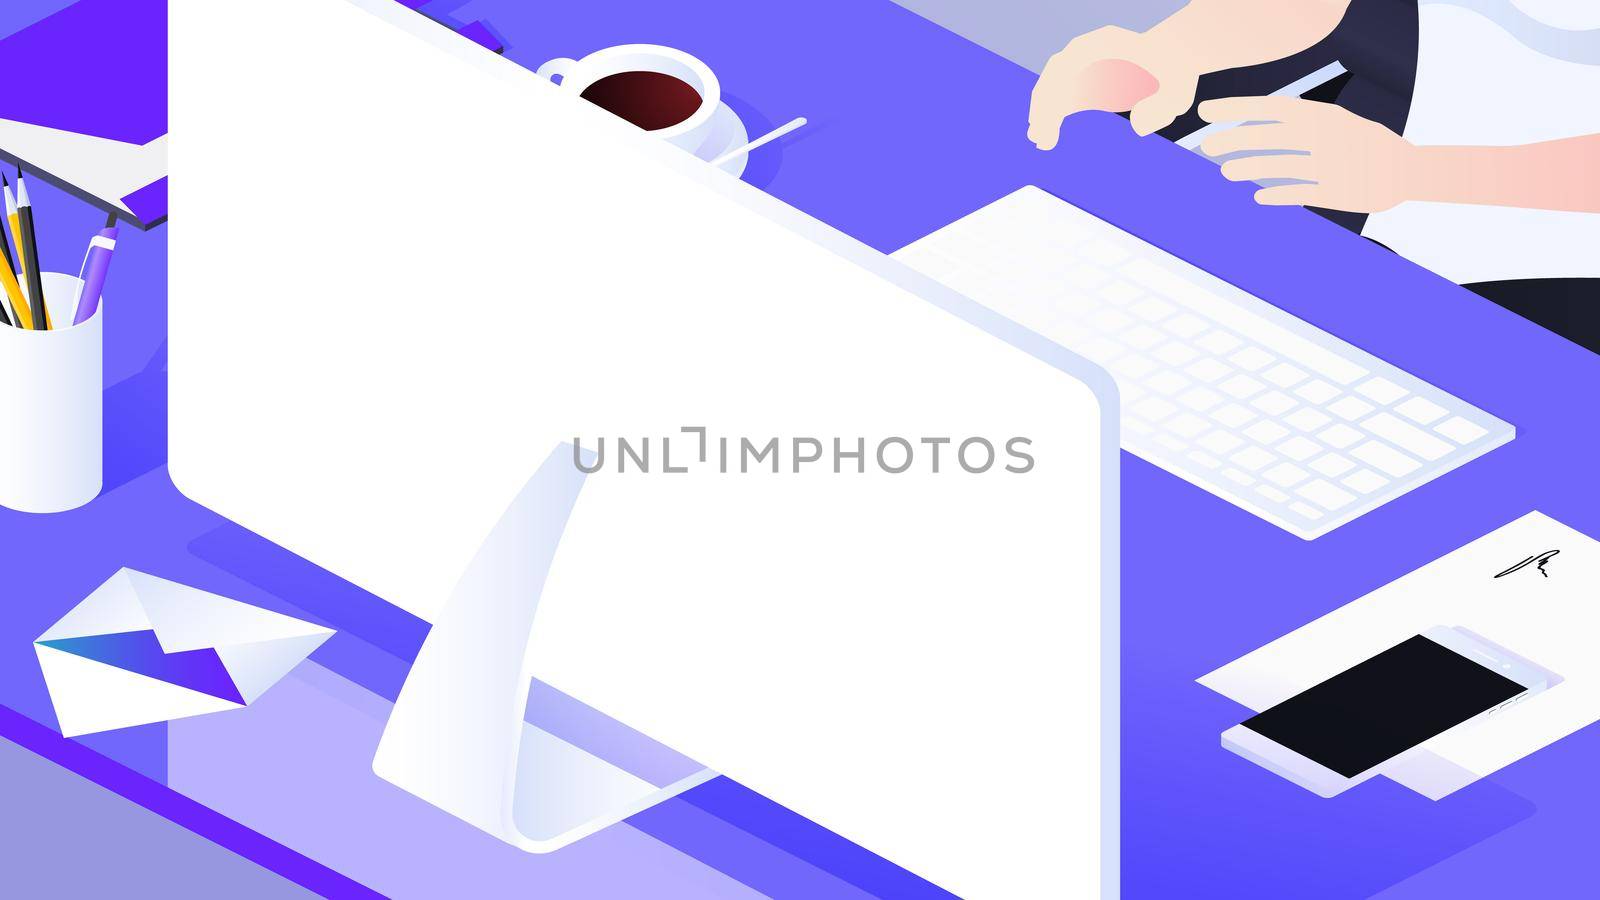 3d Isometric Workplace With Monitor, Keyboard, Cellphone, Letters, Cup Of Coffee And Writing Materials. Modern Vector Illustration.